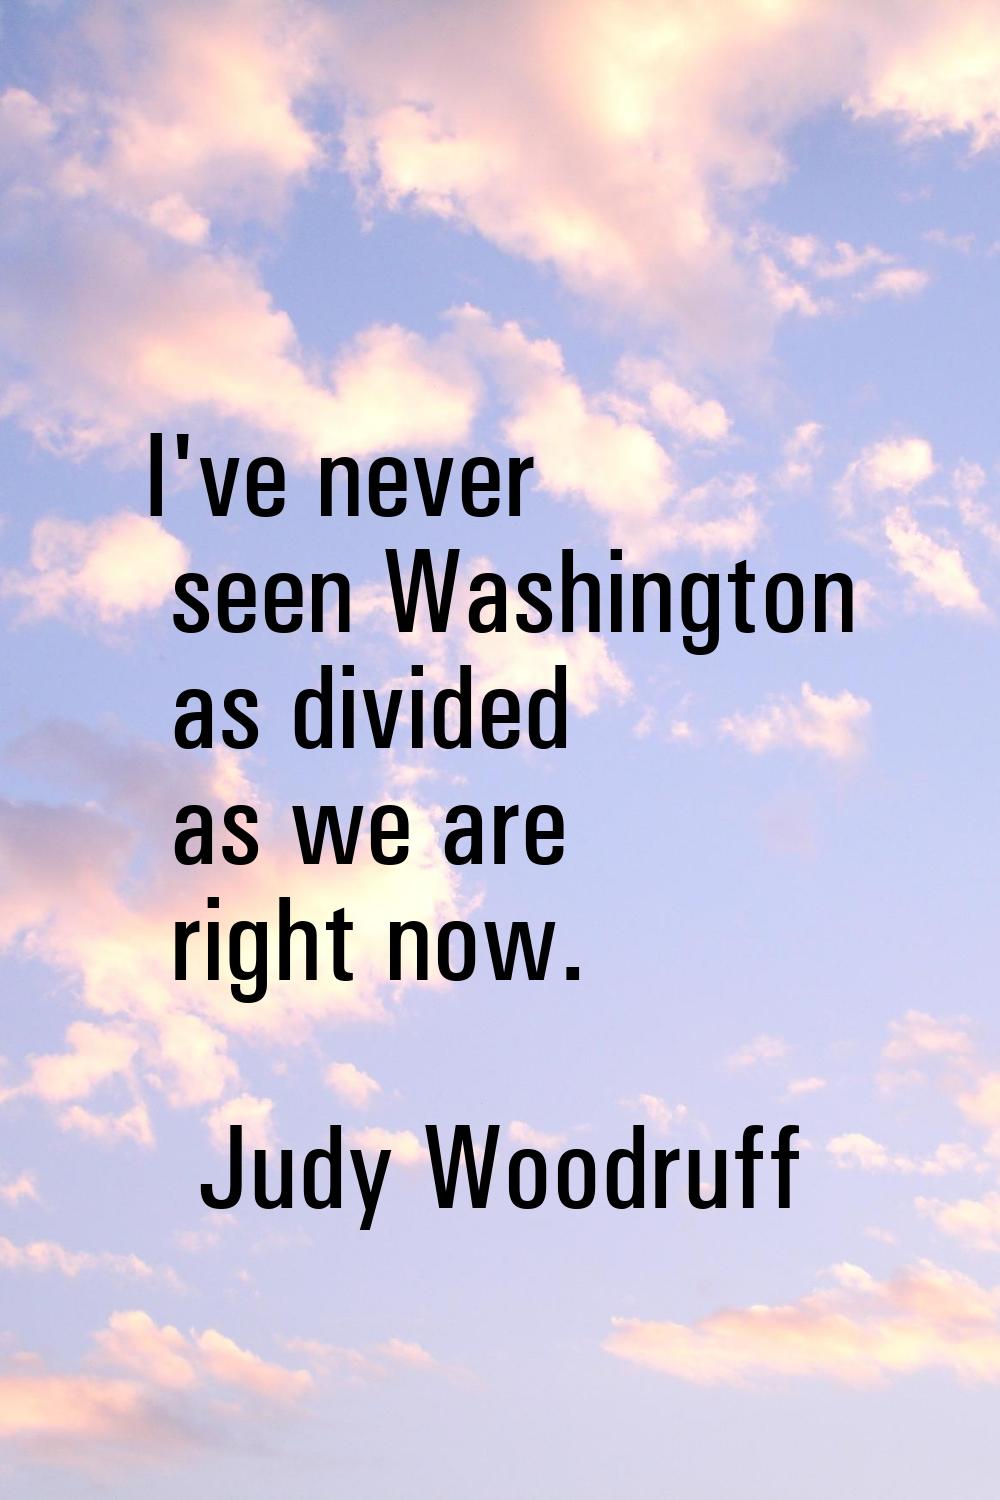 I've never seen Washington as divided as we are right now.